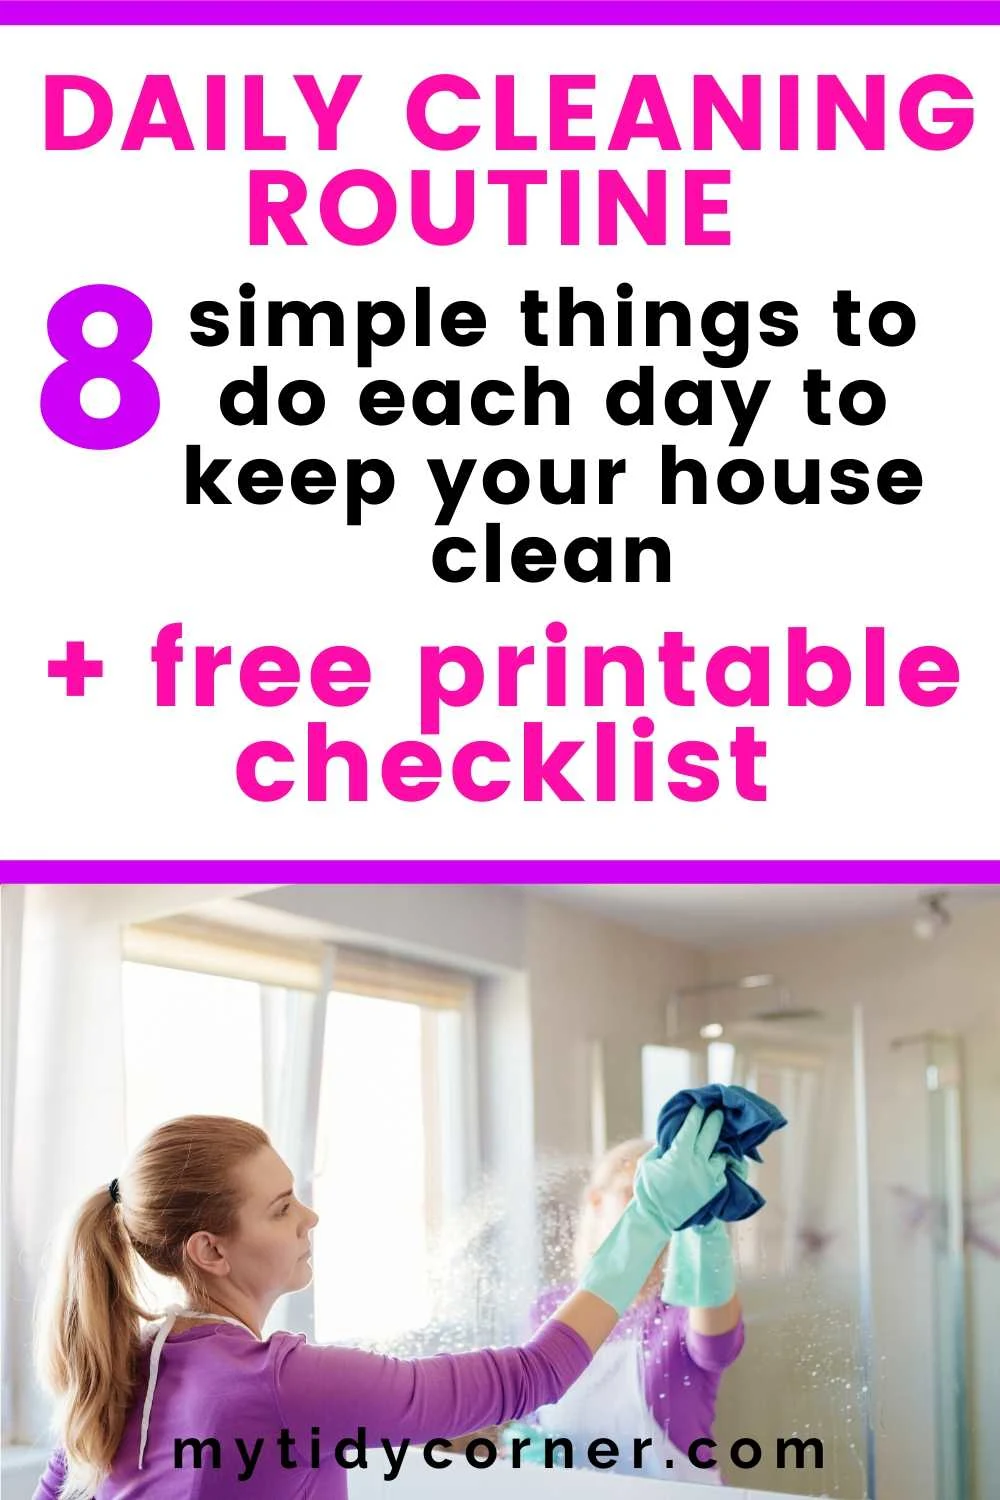 Things to do each day to keep your house clean (Daily cleaning routine)